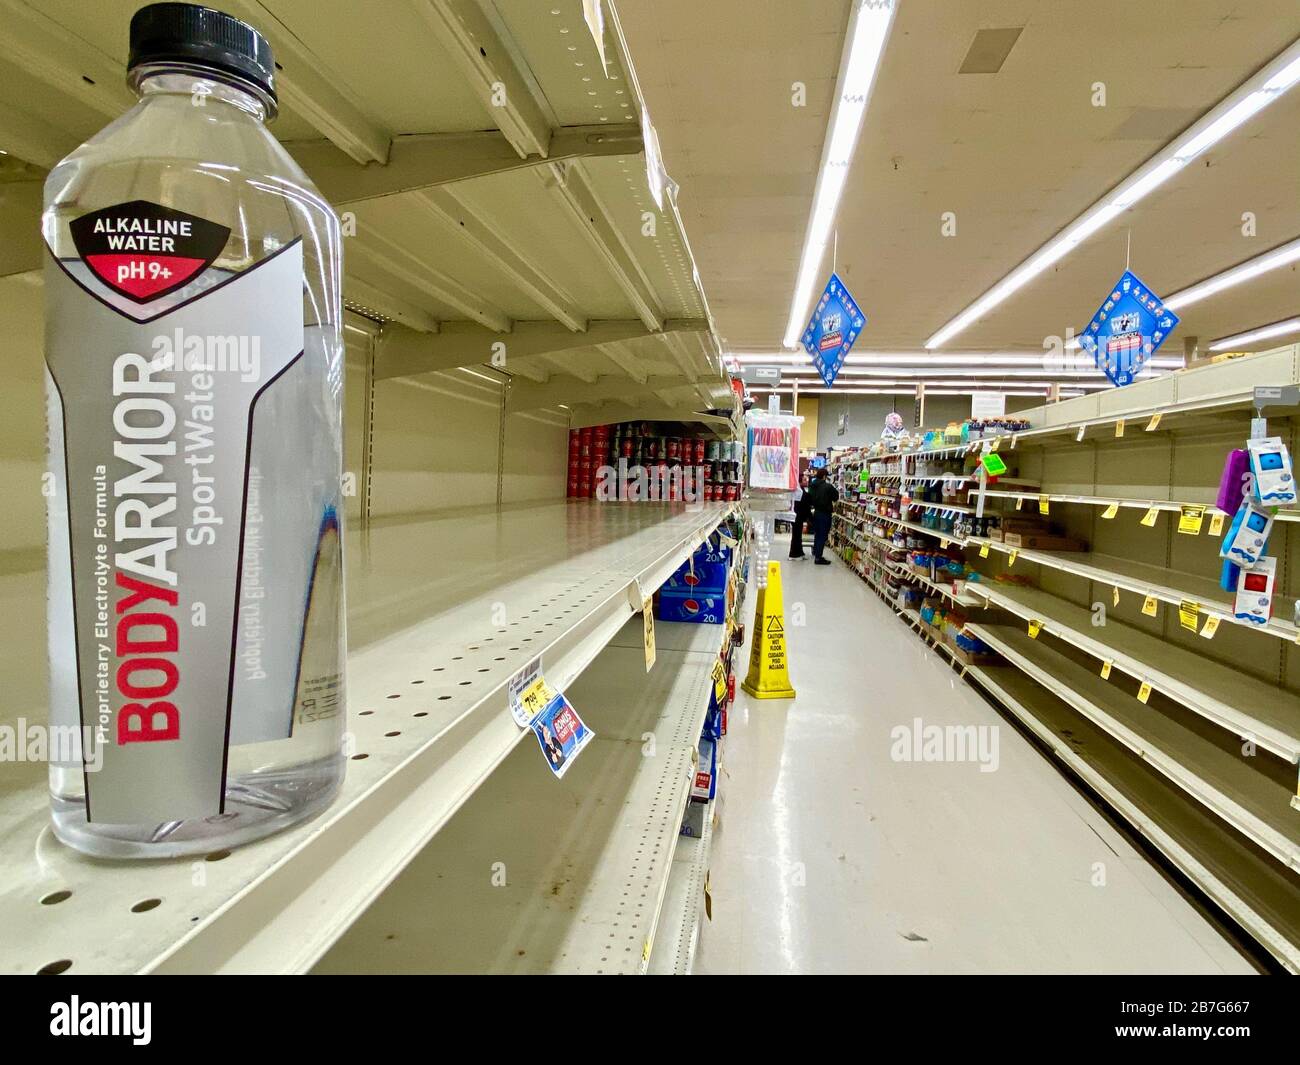 https://c8.alamy.com/comp/2B7G667/montecito-california-usa-15th-mar-2020-empty-grocery-store-shelves-at-vons-is-an-unusual-sight-in-wealthy-montecito-california-water-bread-milk-potatoes-meat-bananas-soup-and-other-canned-goods-are-the-items-most-depleted-a-supervisor-said-that-more-food-has-been-ordered-but-delivery-has-been-delayed-and-there-is-no-indication-when-it-will-resume-even-at-900pm-on-a-sunday-customers-were-flooding-in-amidst-news-of-impending-quarantine-for-seniors-over-age-65-from-californias-governor-today-and-and-announcement-that-bars-and-nightclubs-will-be-closing-the-latest-report-is-2B7G667.jpg